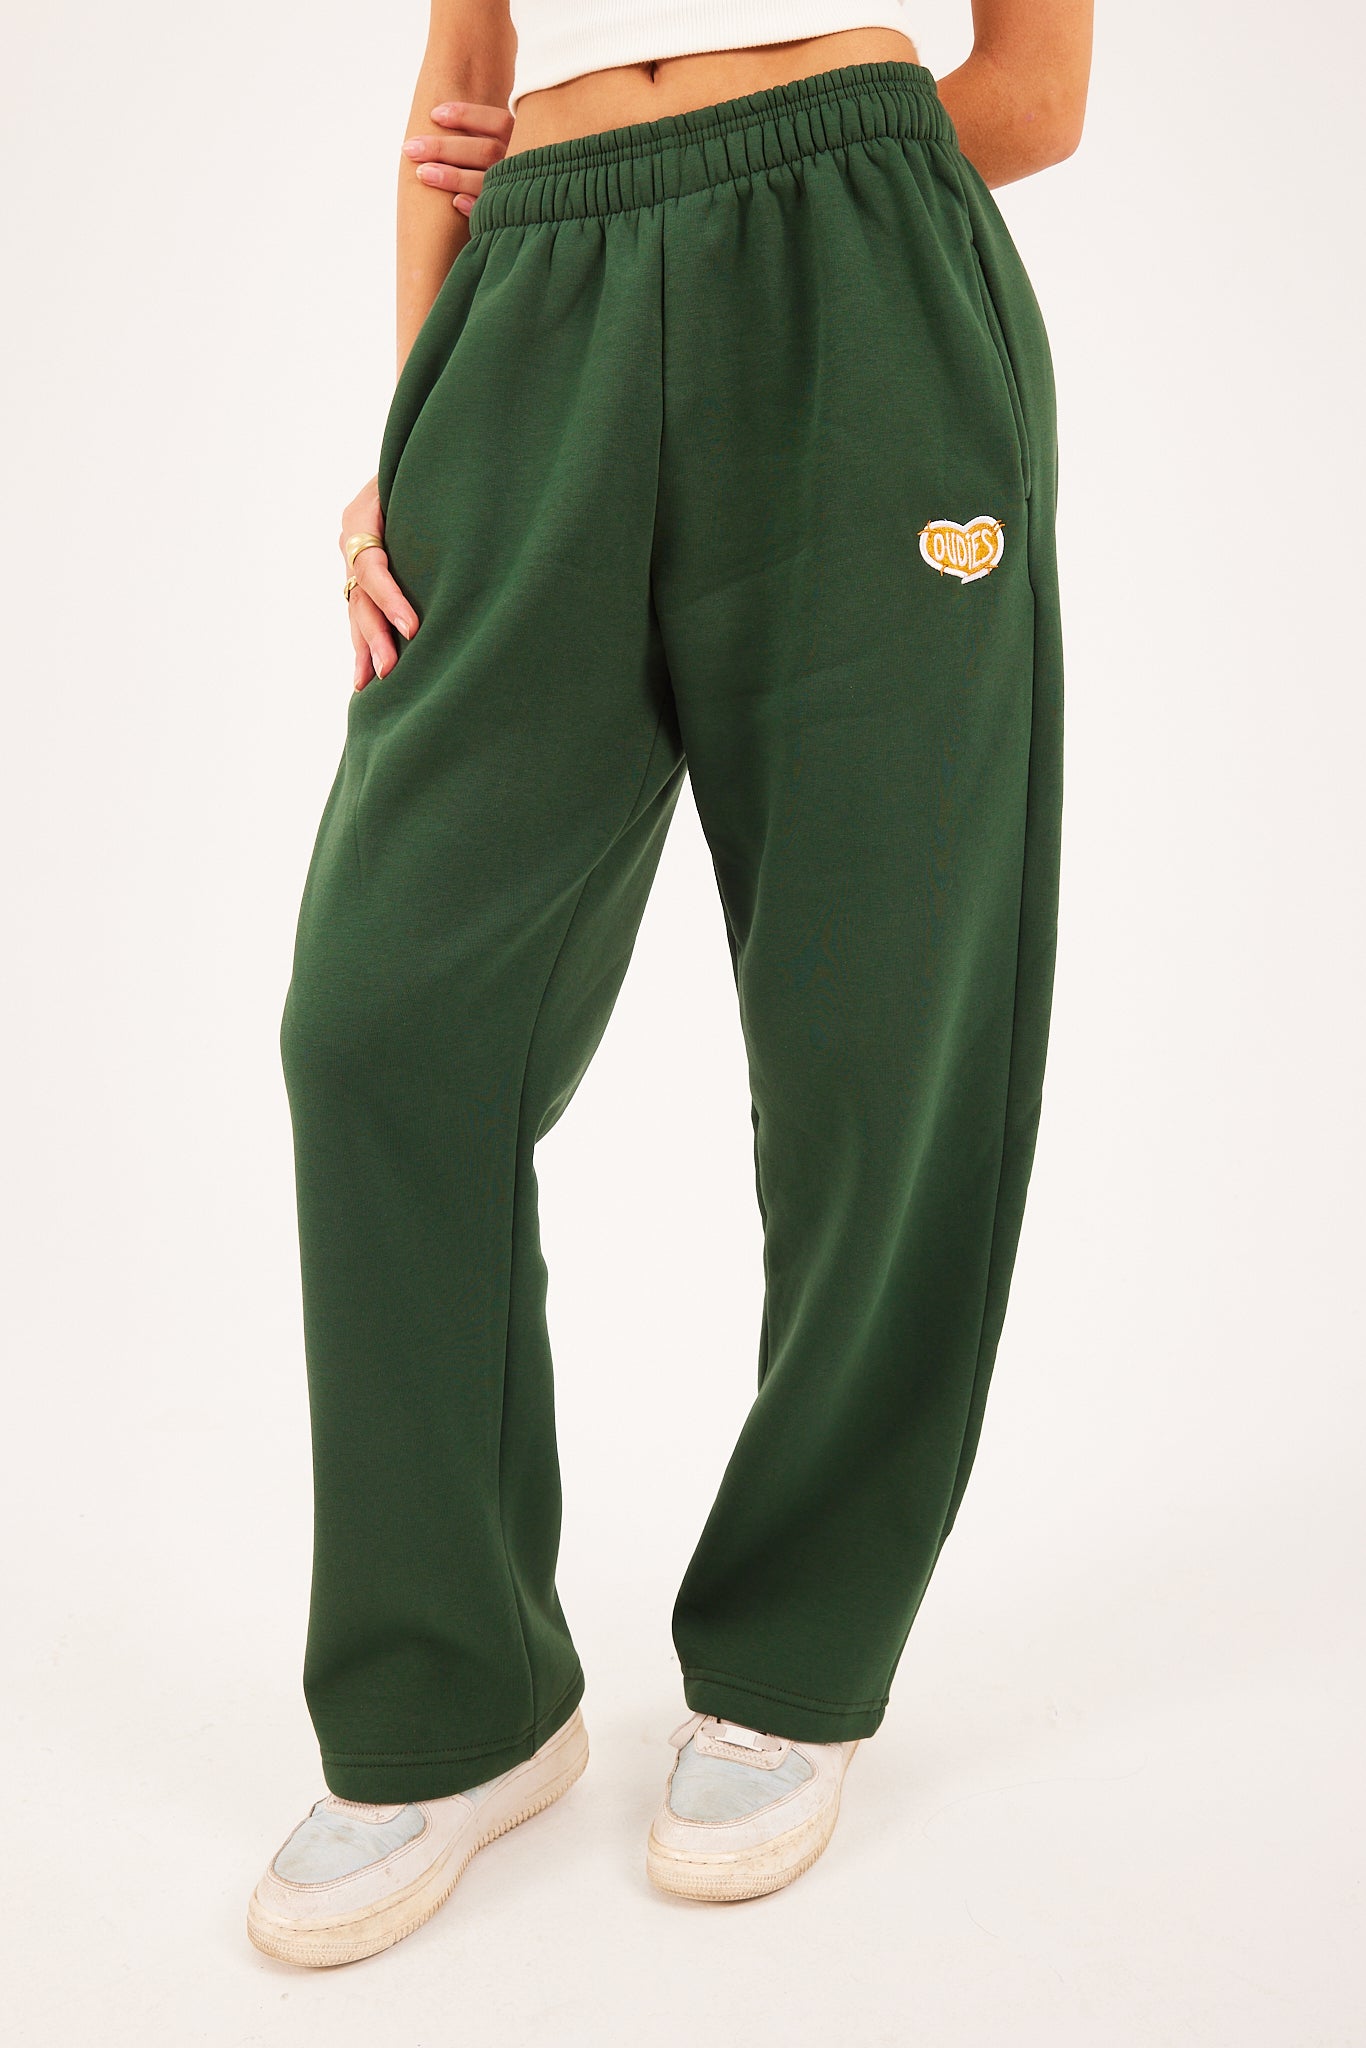 Collective Green Sweatpants